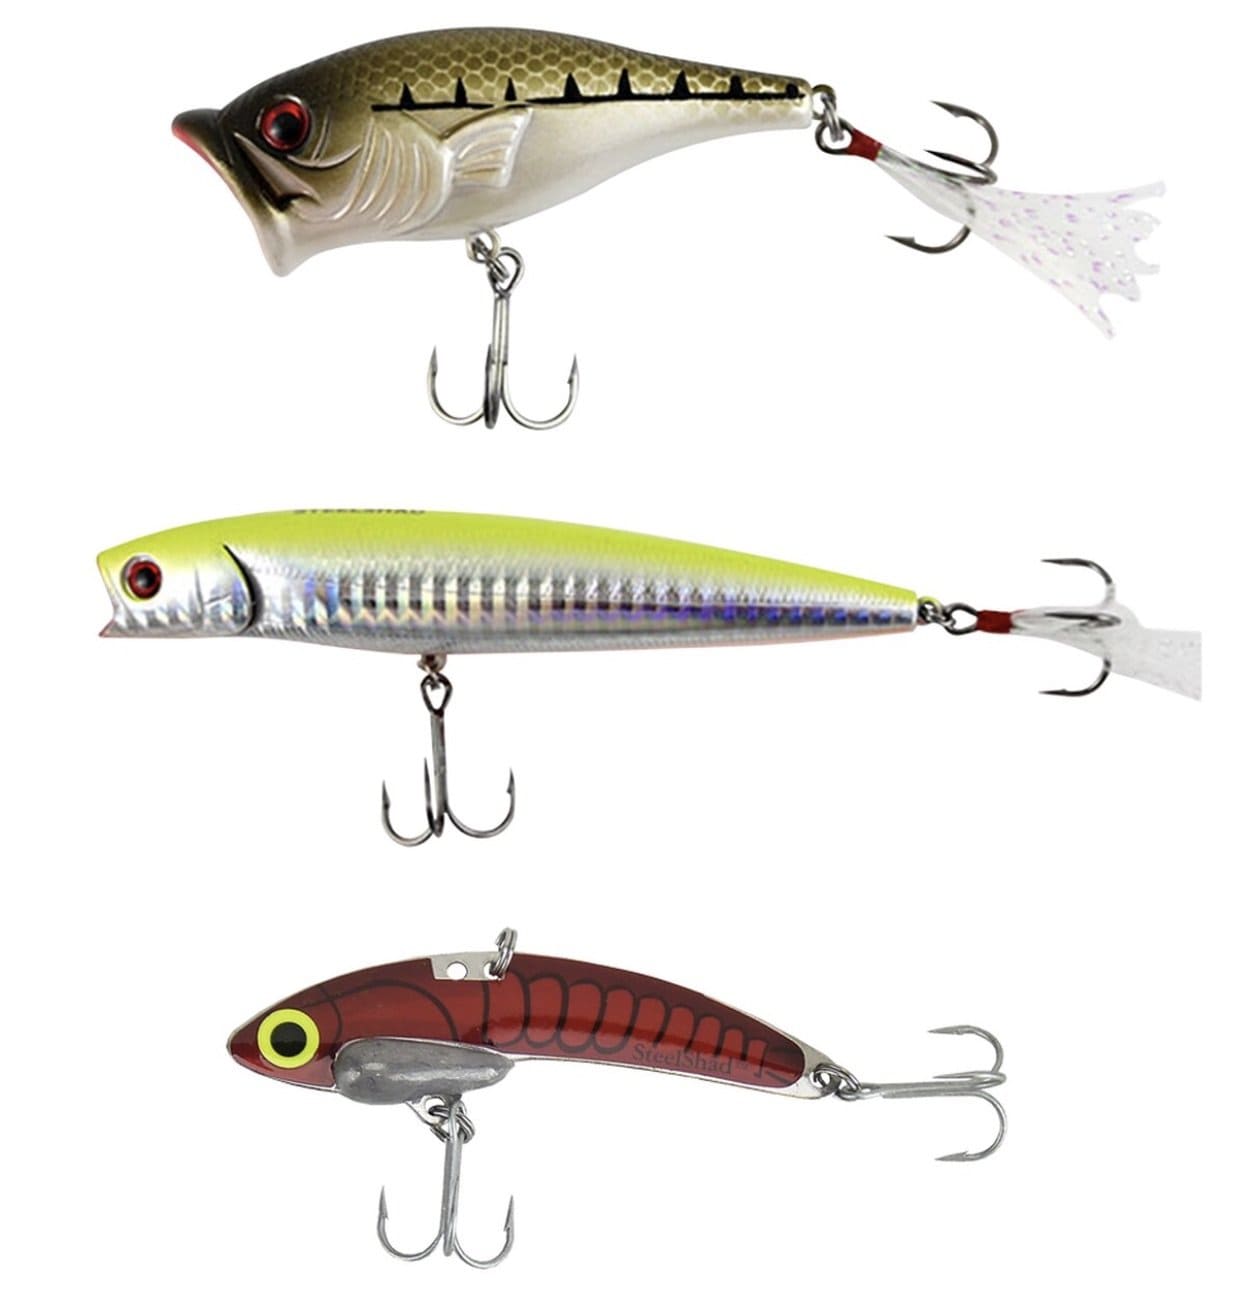 https://cdn.shopify.com/s/files/1/0632/8264/3186/files/steelshad-tackle-bundle-baby-bass-pack-pro-series-3-pack-29791549849765.jpg?v=1705677560&width=1236